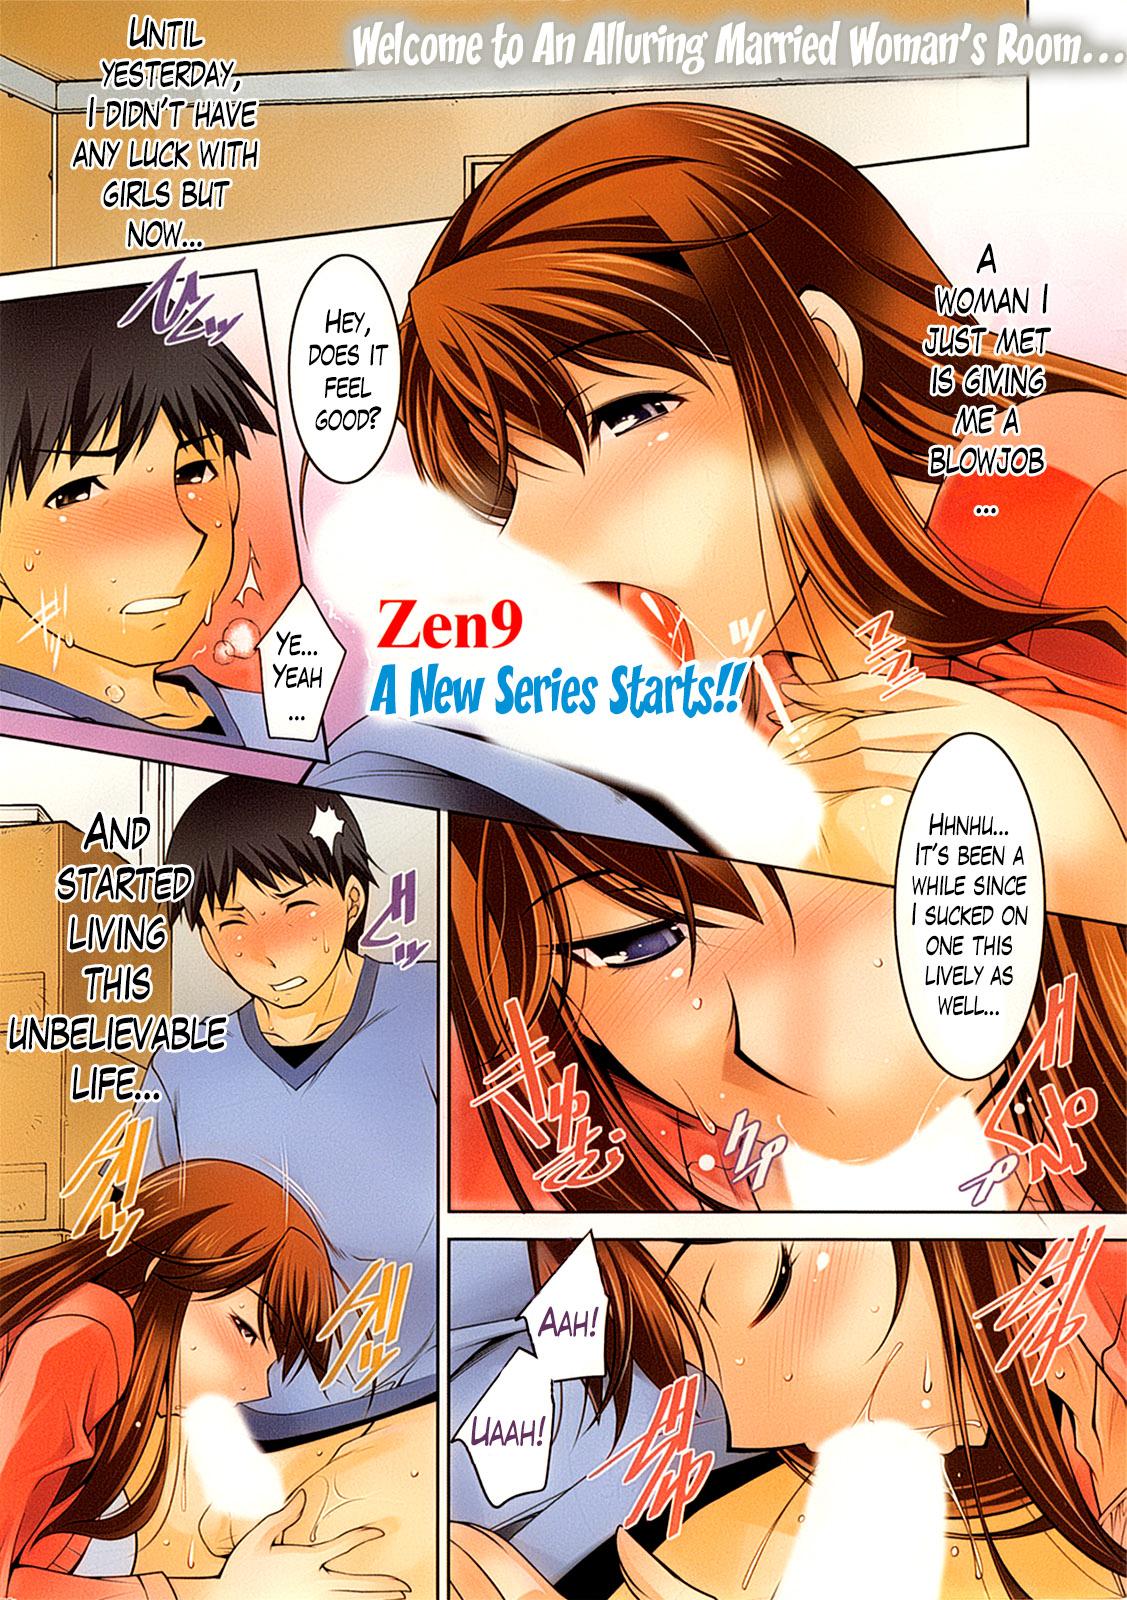 Moneytalks Taikutsu na Gogo no Sugoshikata Ch. 1 | A Way to Spend a Boring Afternoon Ch. 1-3 Indonesian - Picture 1